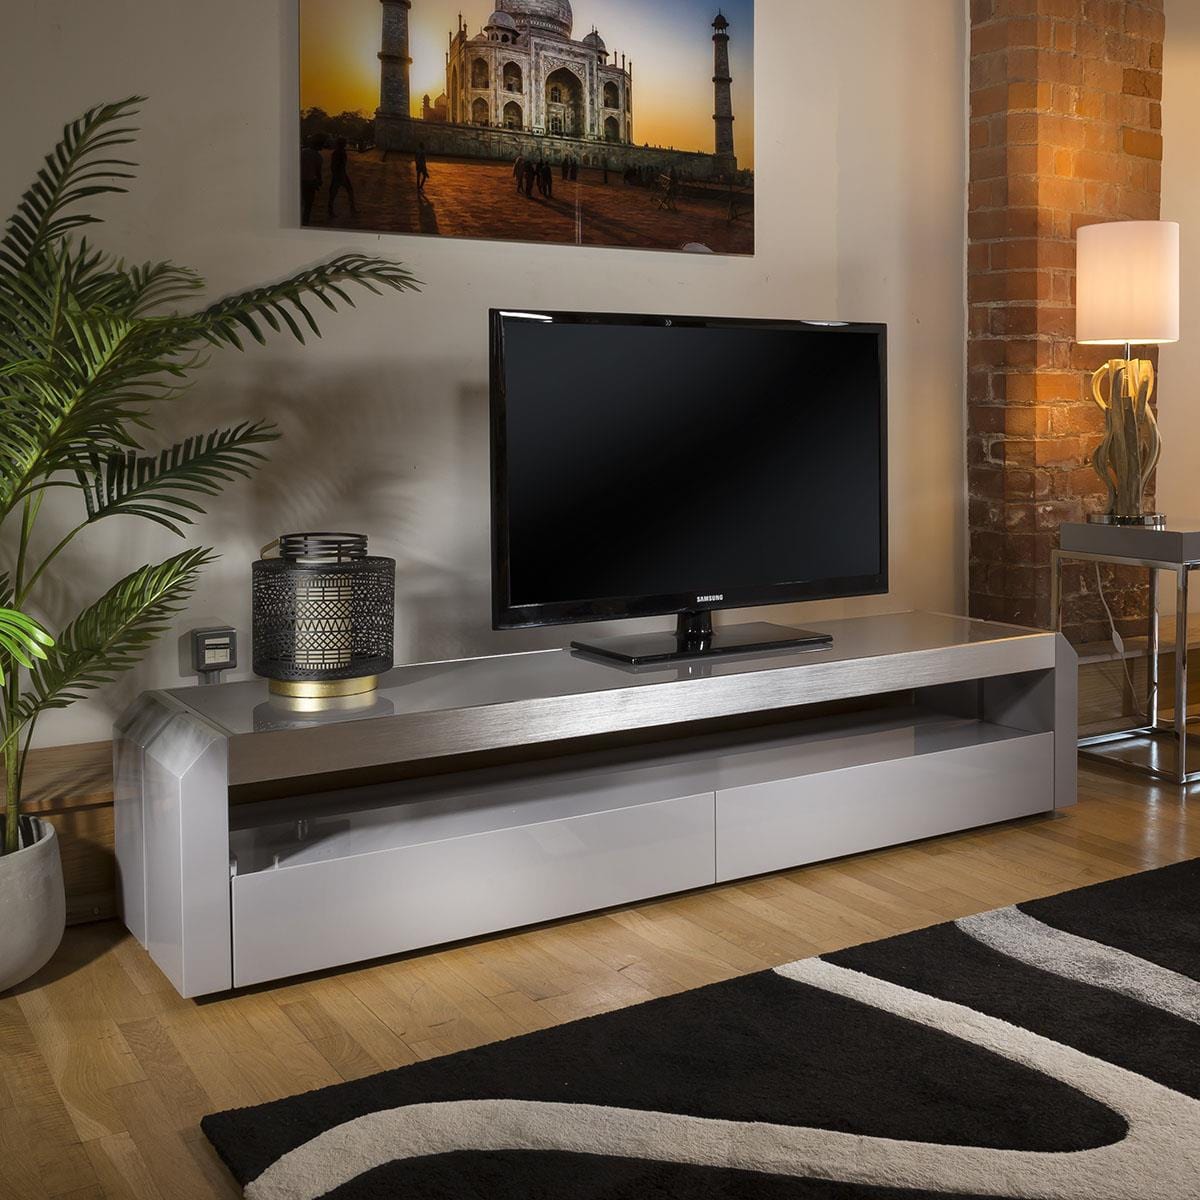 Quatropi Modern Grey TV Cabinet Grey Gloss 200 cm Unit / Stainless with Glass Top